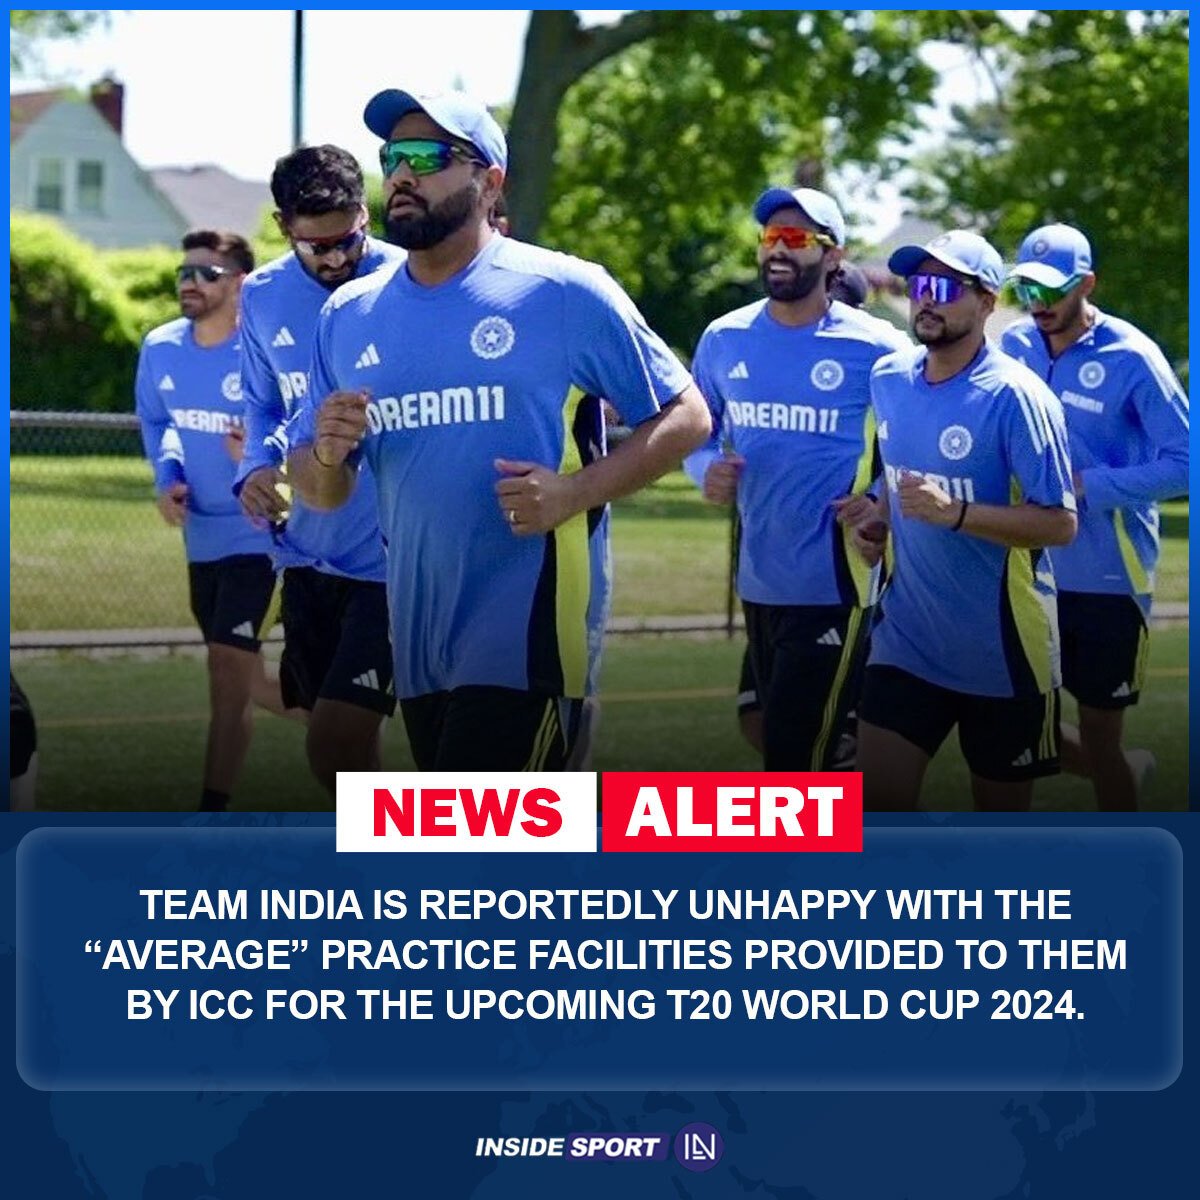 Team India practiced at Cantiague Park and according to reports, they used three of the six drop-in pitches available at the makeshift venue but were not satisfied with the arrangements at the venue. #T20WorldCup2024 #TeamIndia #RohitSharma #RahulDravid #CricketTwitter